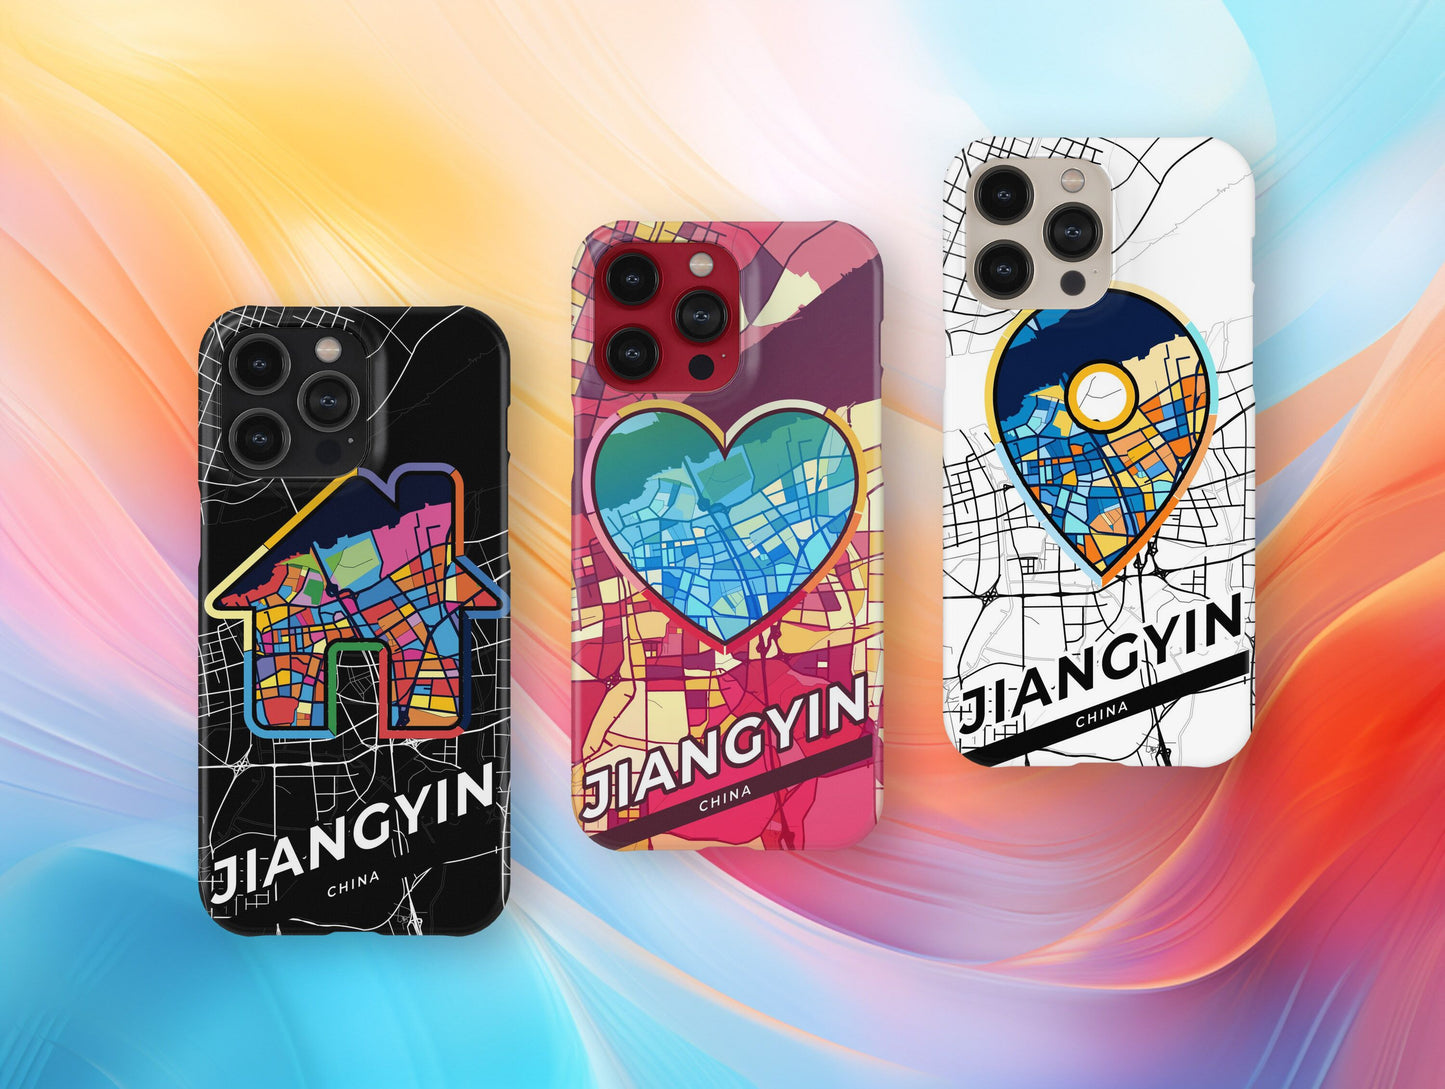 Jiangyin China slim phone case with colorful icon. Birthday, wedding or housewarming gift. Couple match cases.